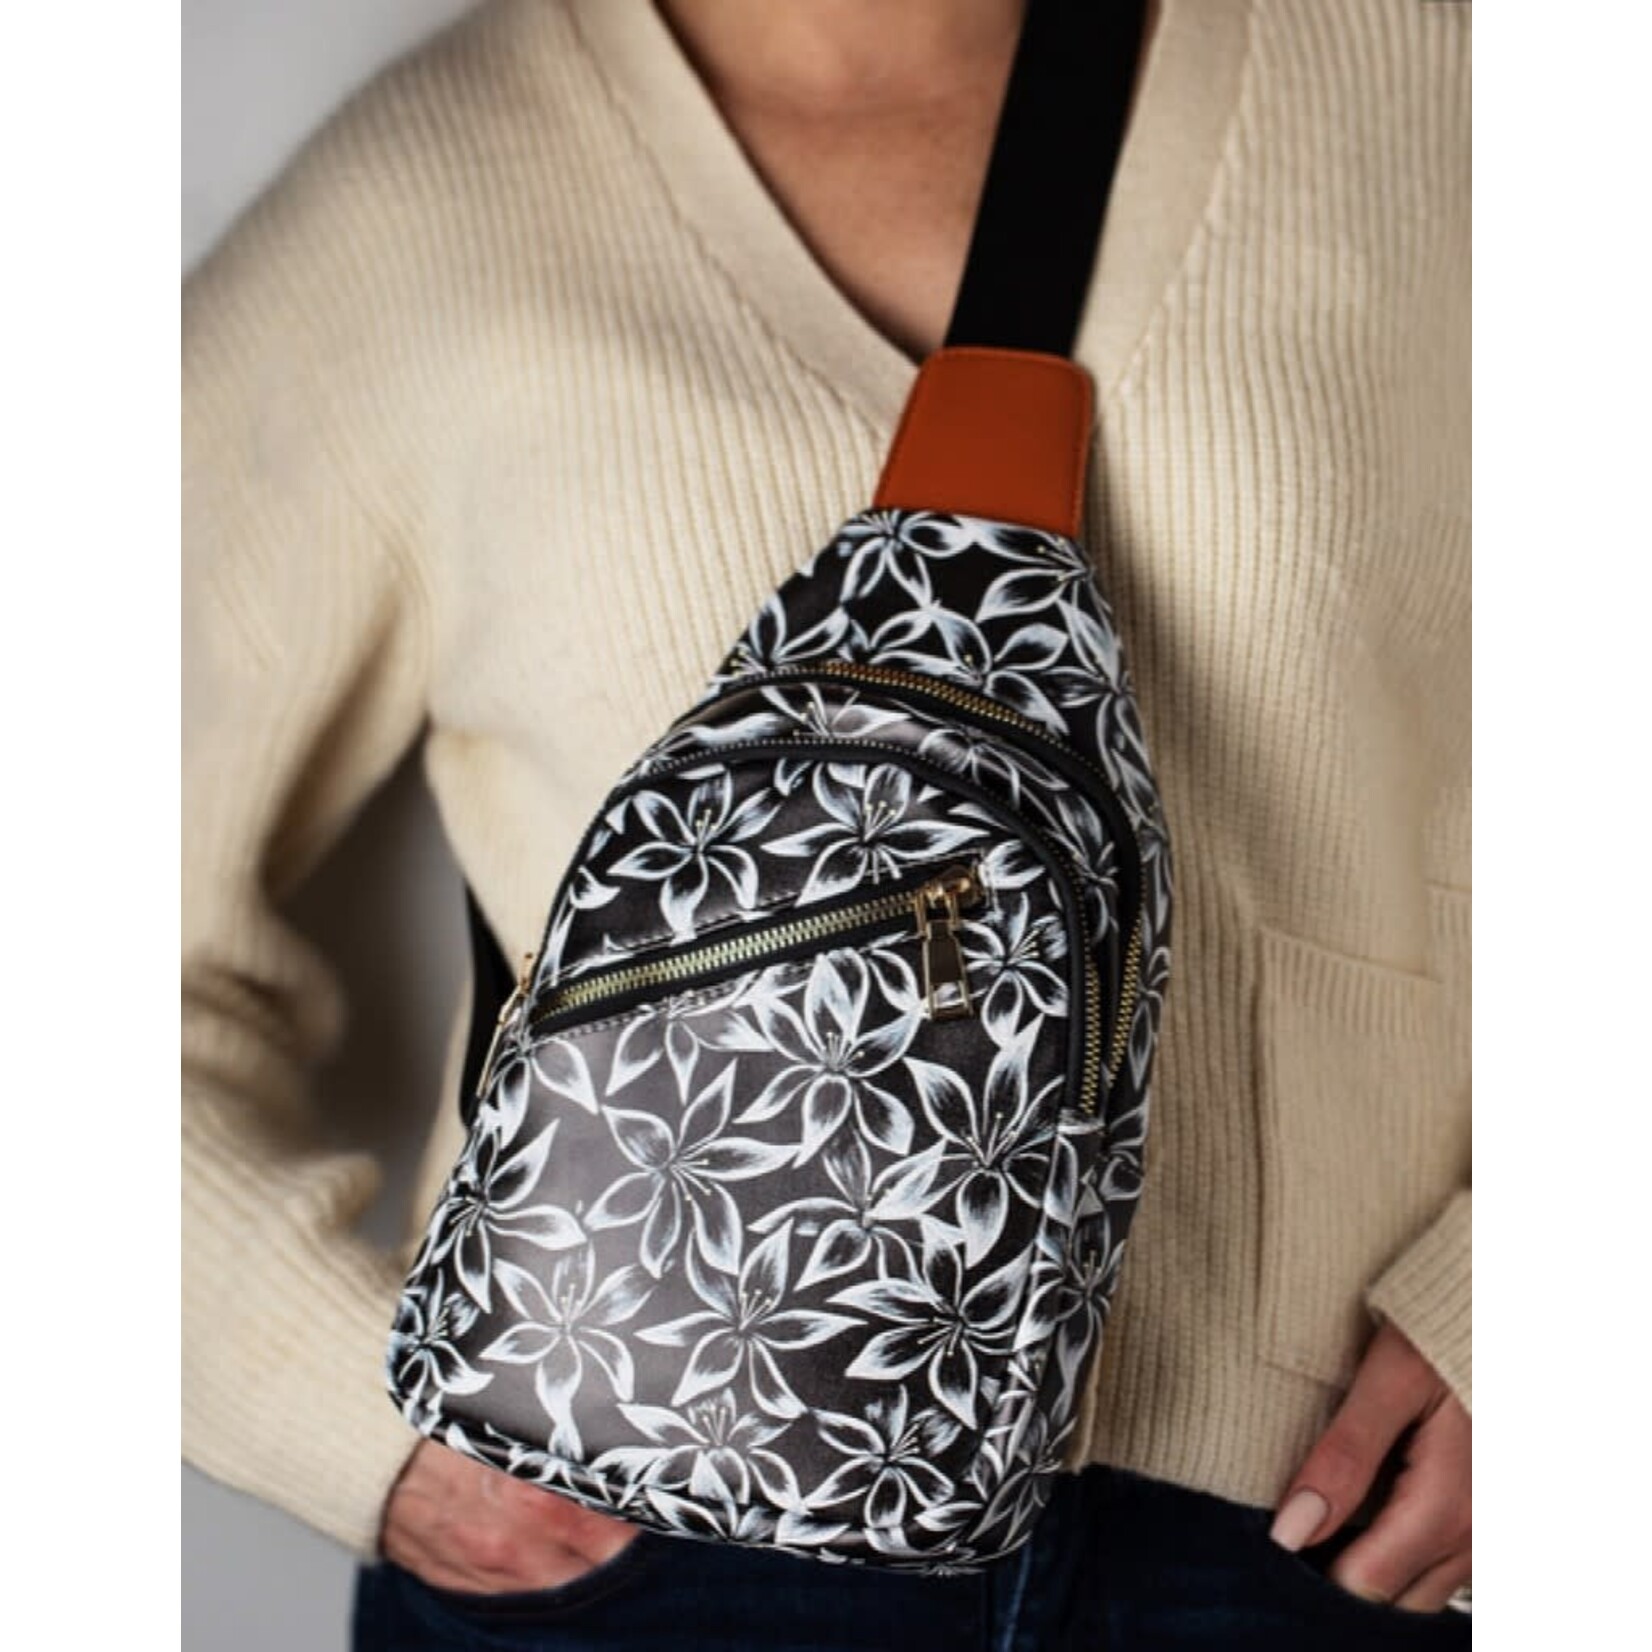 Denise Cassidy Wood Collection Denise Cassidy Wood Collection - Urban Sling